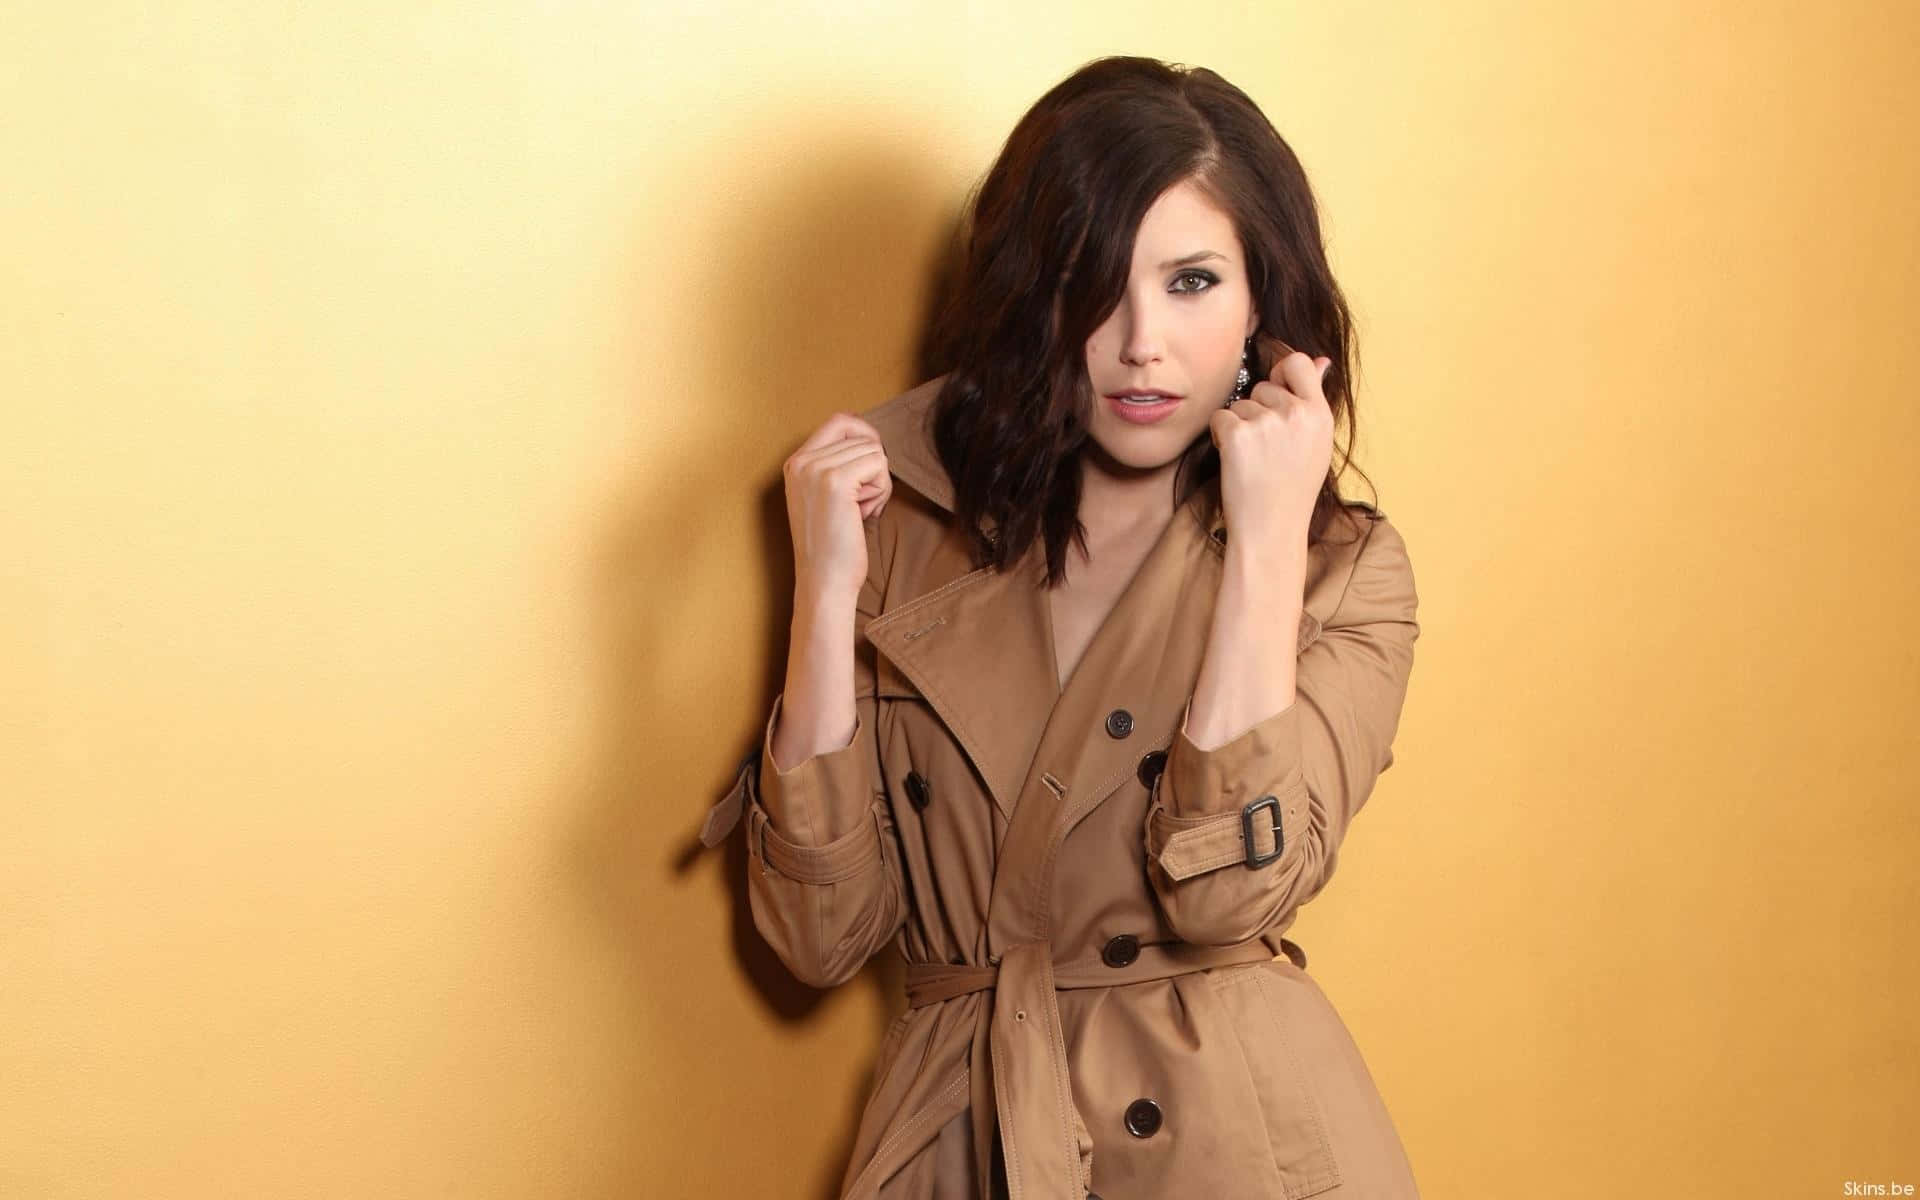 A Woman In A Trench Coat Leaning Against A Yellow Wall Background